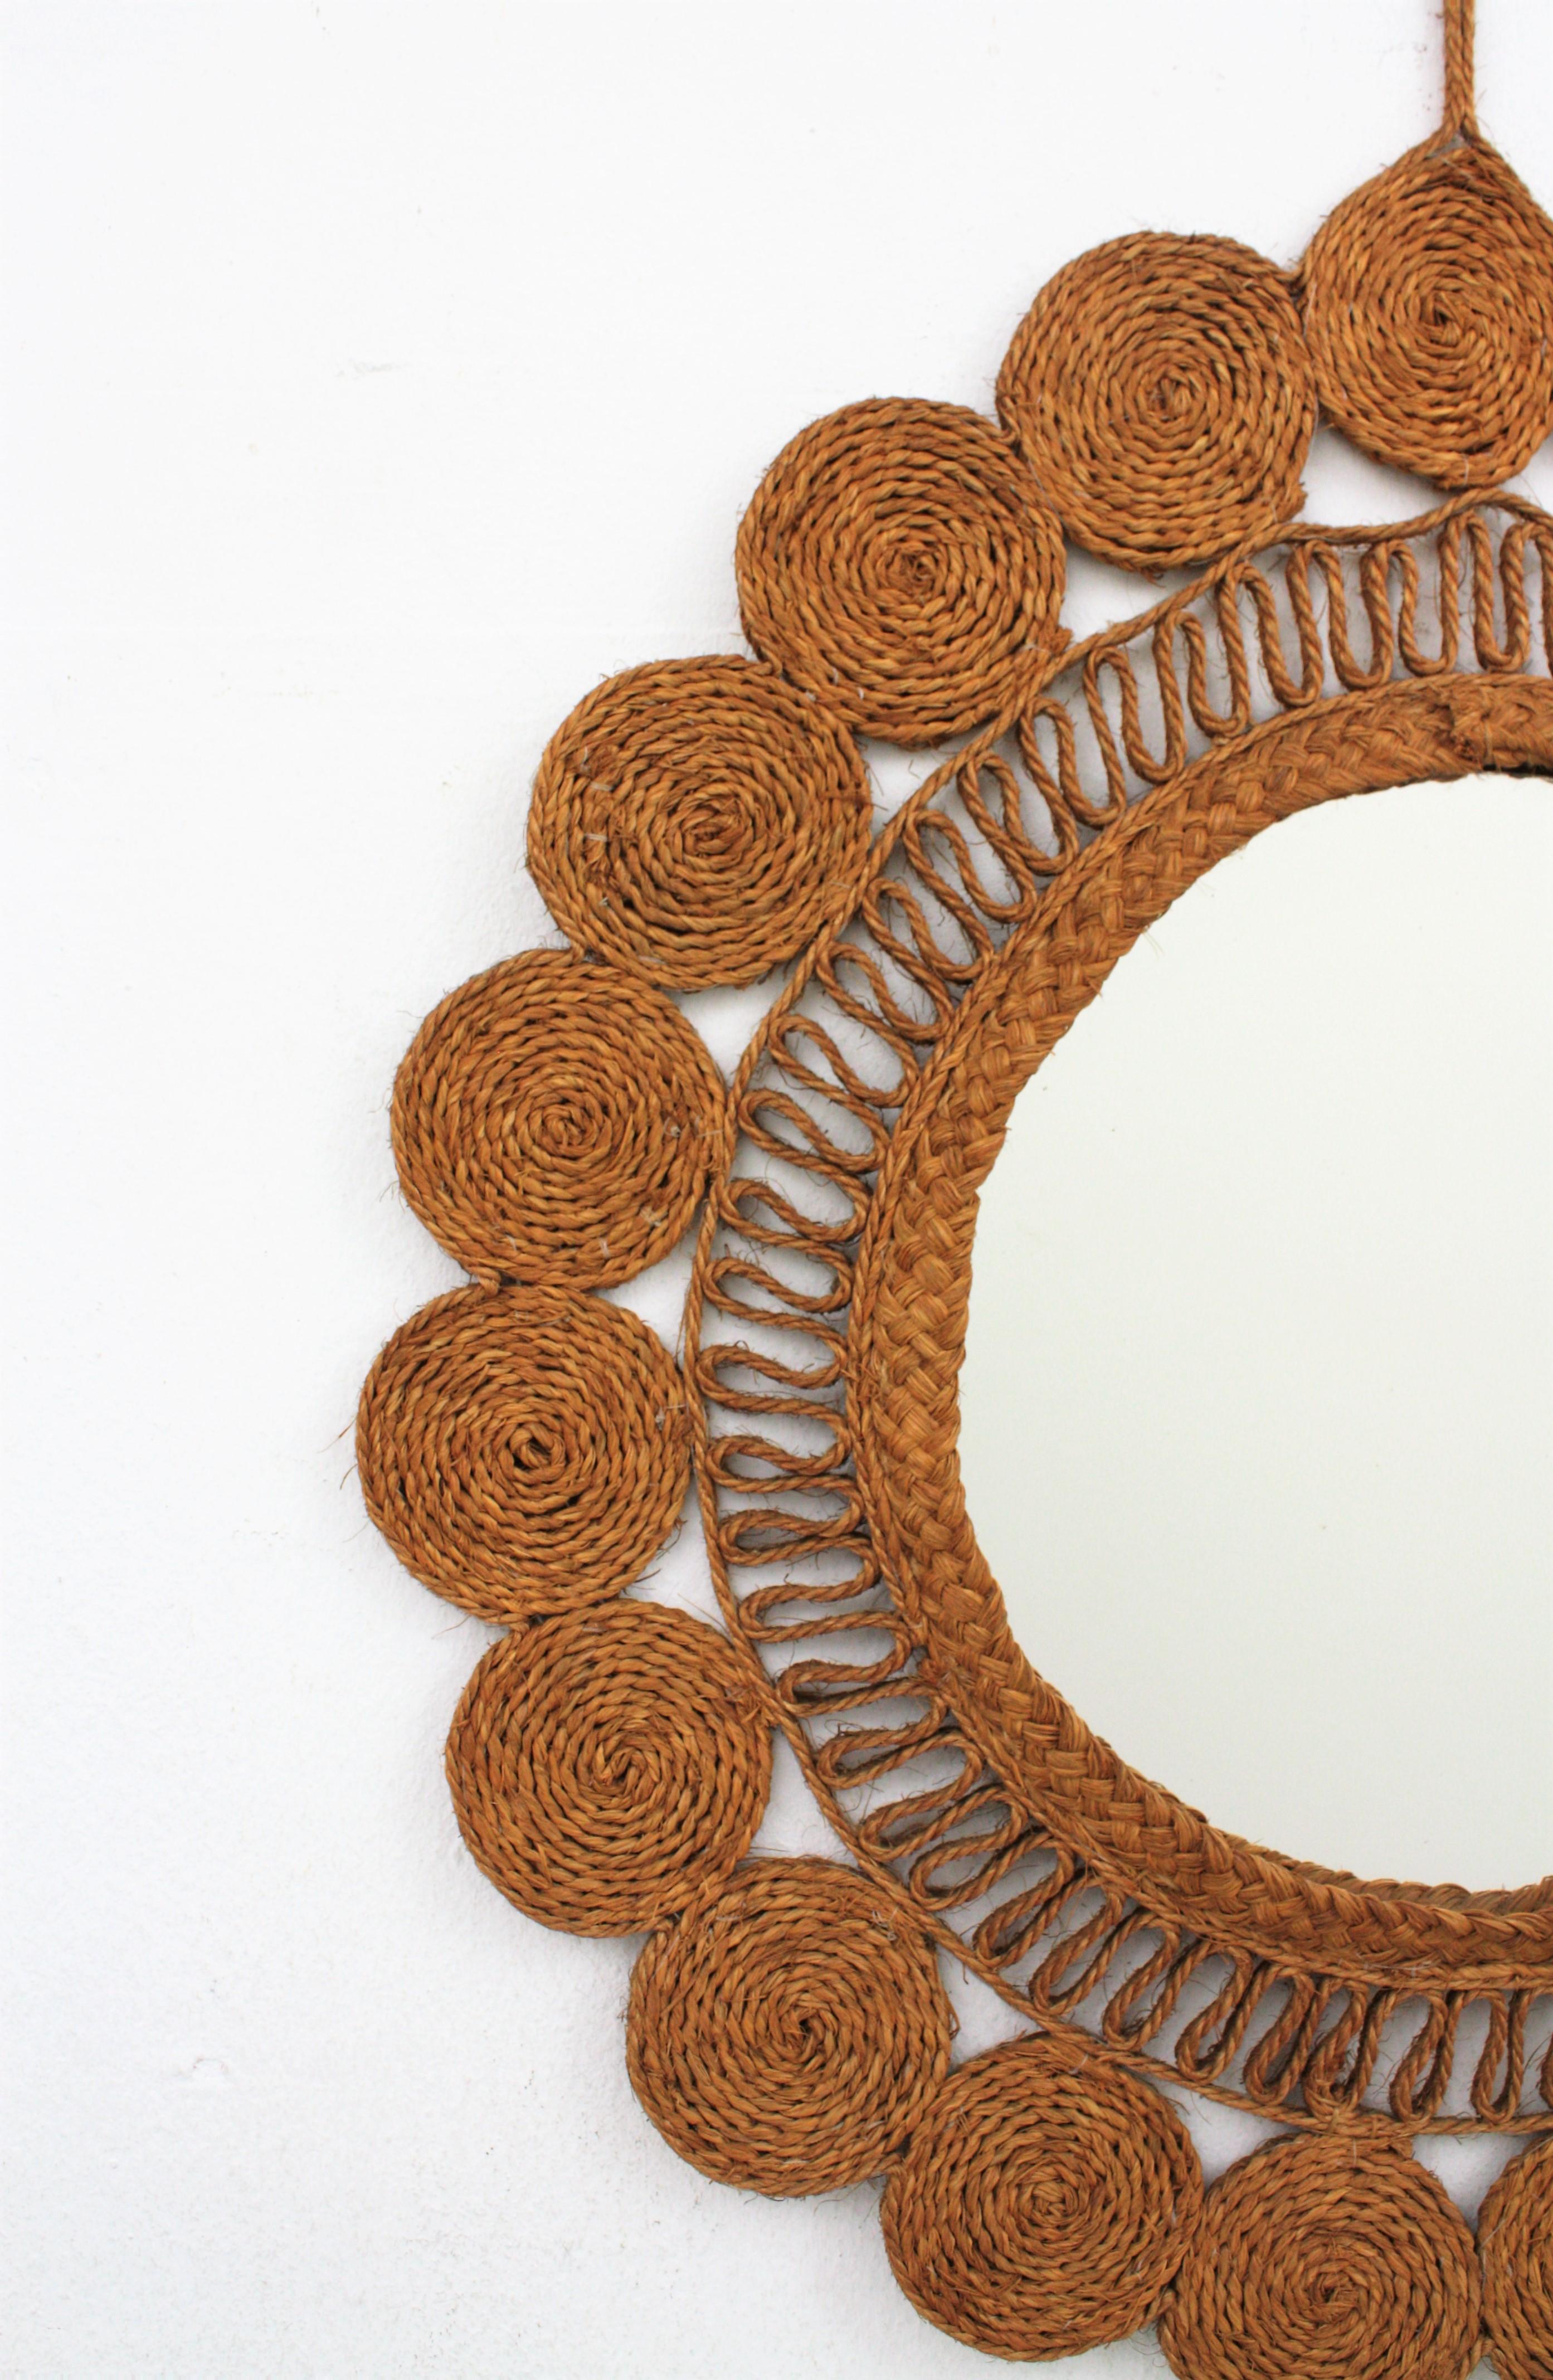 Woven Esparto Rope Wall Mirror, Spain, 1960s For Sale 1